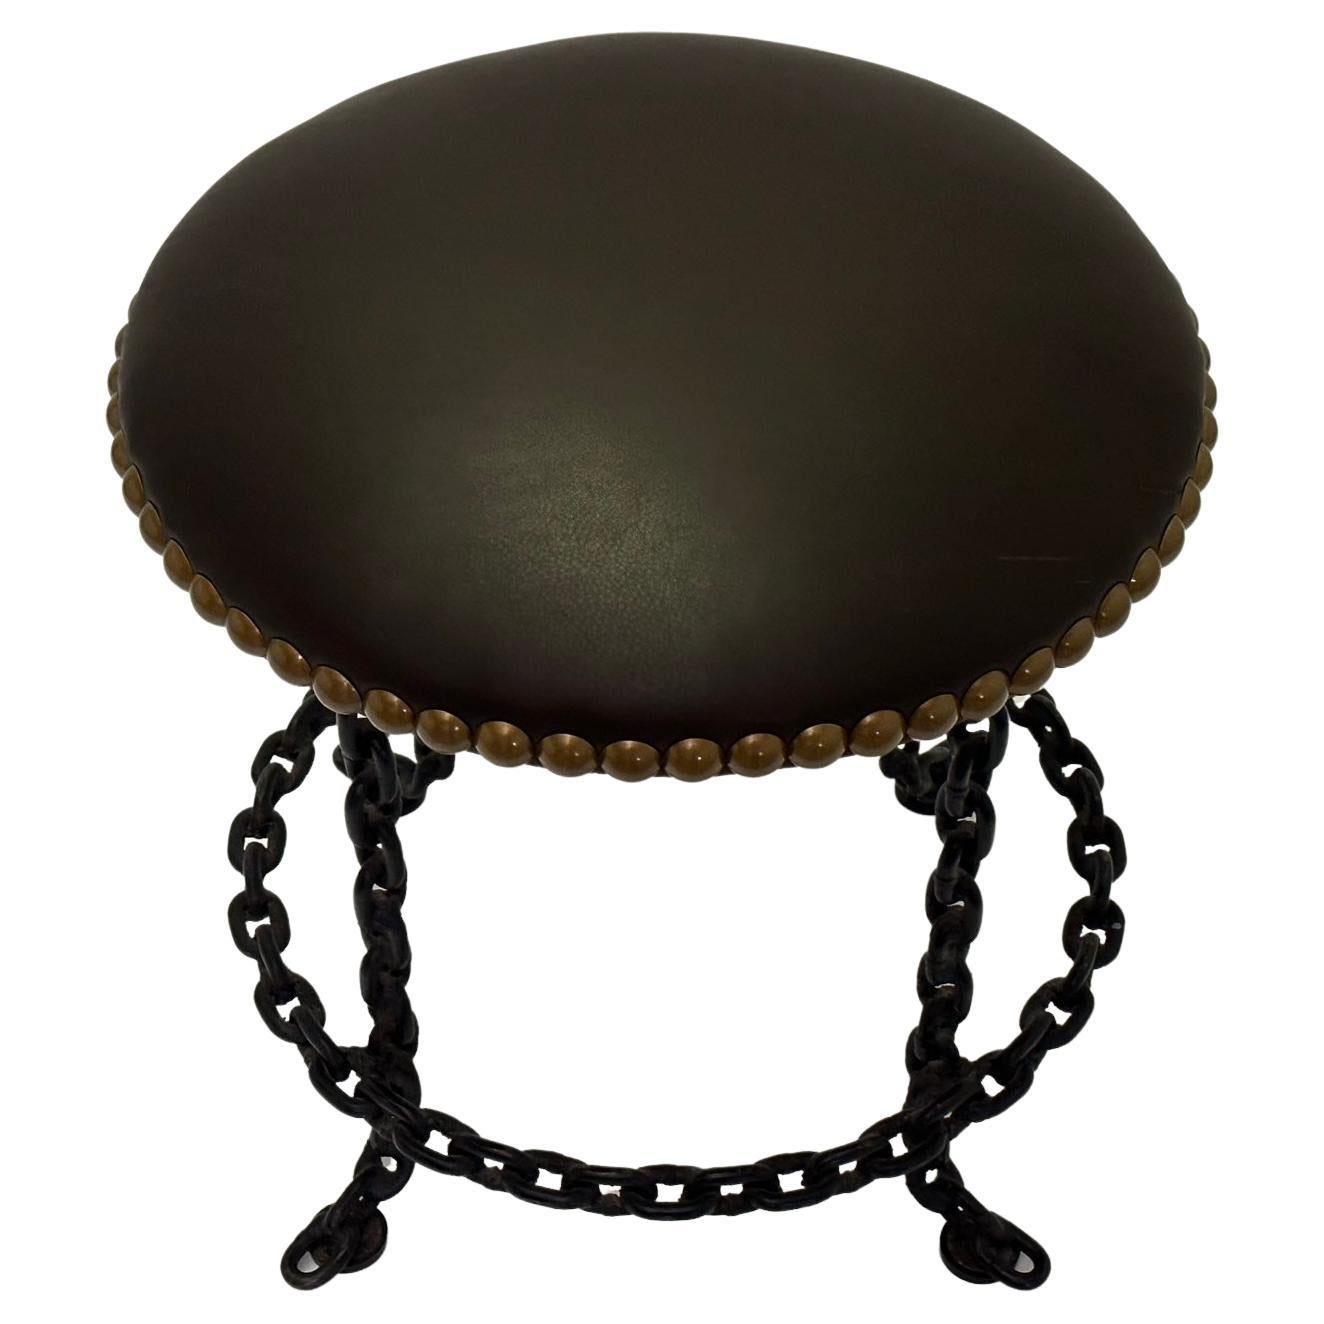 Sexy Vintage Dark Chocolate Brown Leather Stool with Iron Chain Legs For Sale